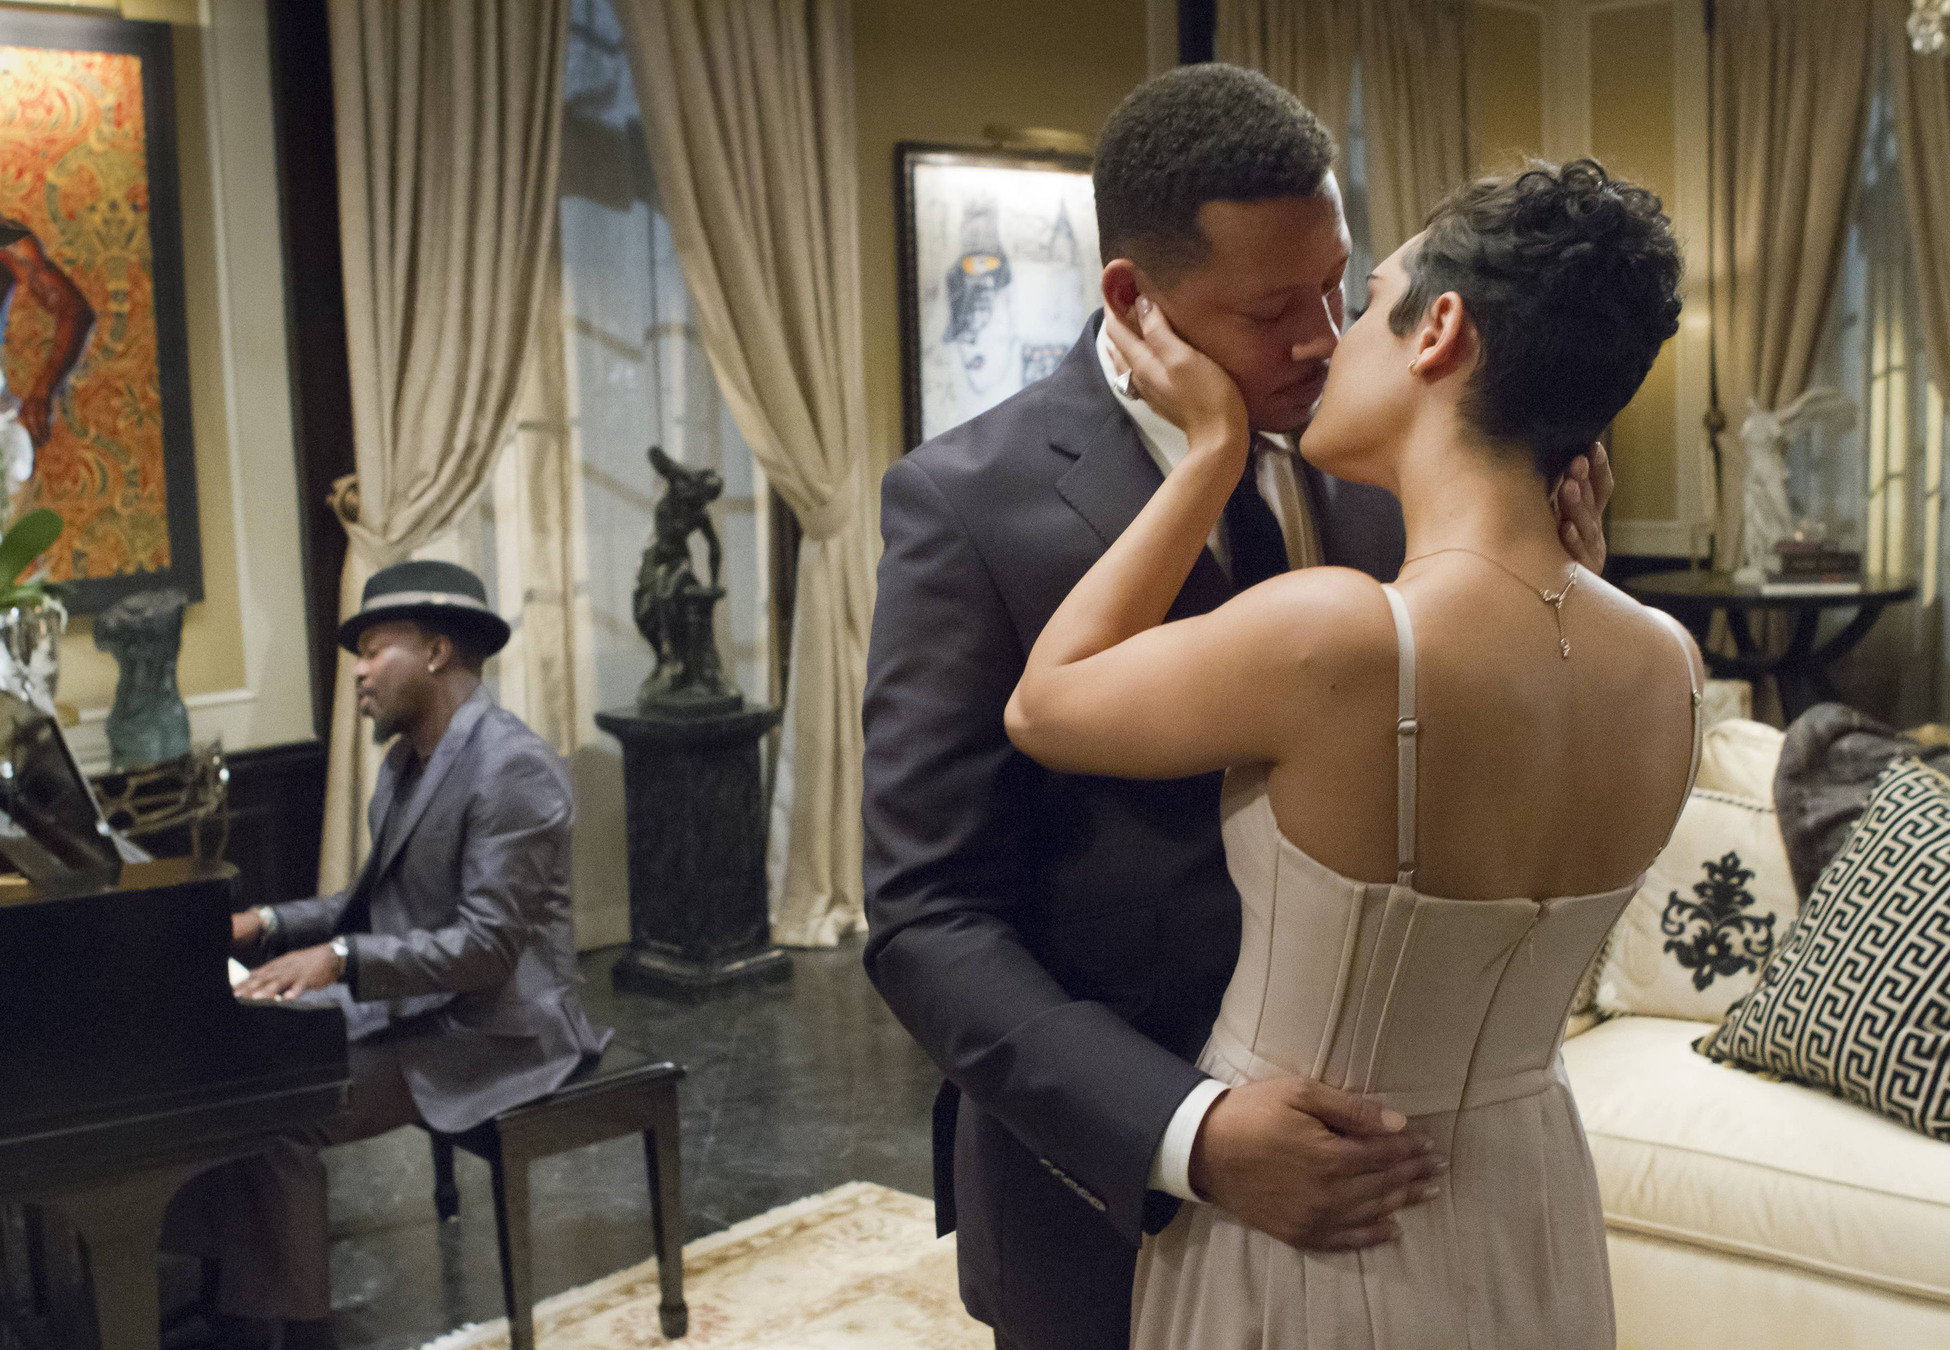 Still of Terrence Howard and Grace Gealey in Empire (2015)